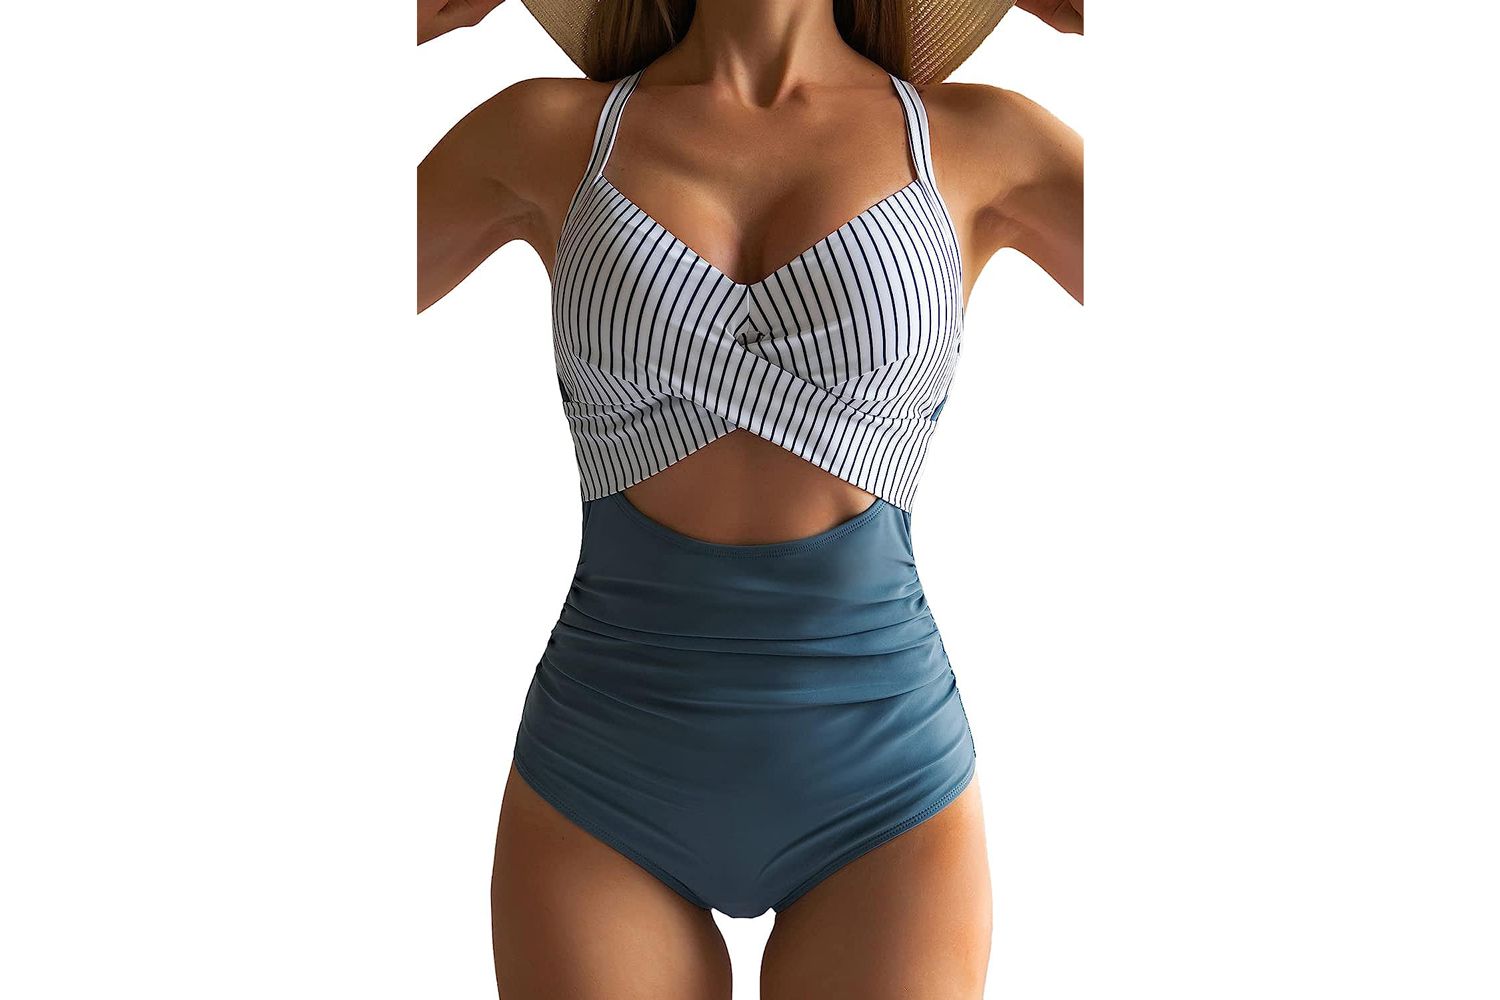 Eomenie Women's One Piece Swimsuits Tummy Control Cutout High Waisted Bathing Suit